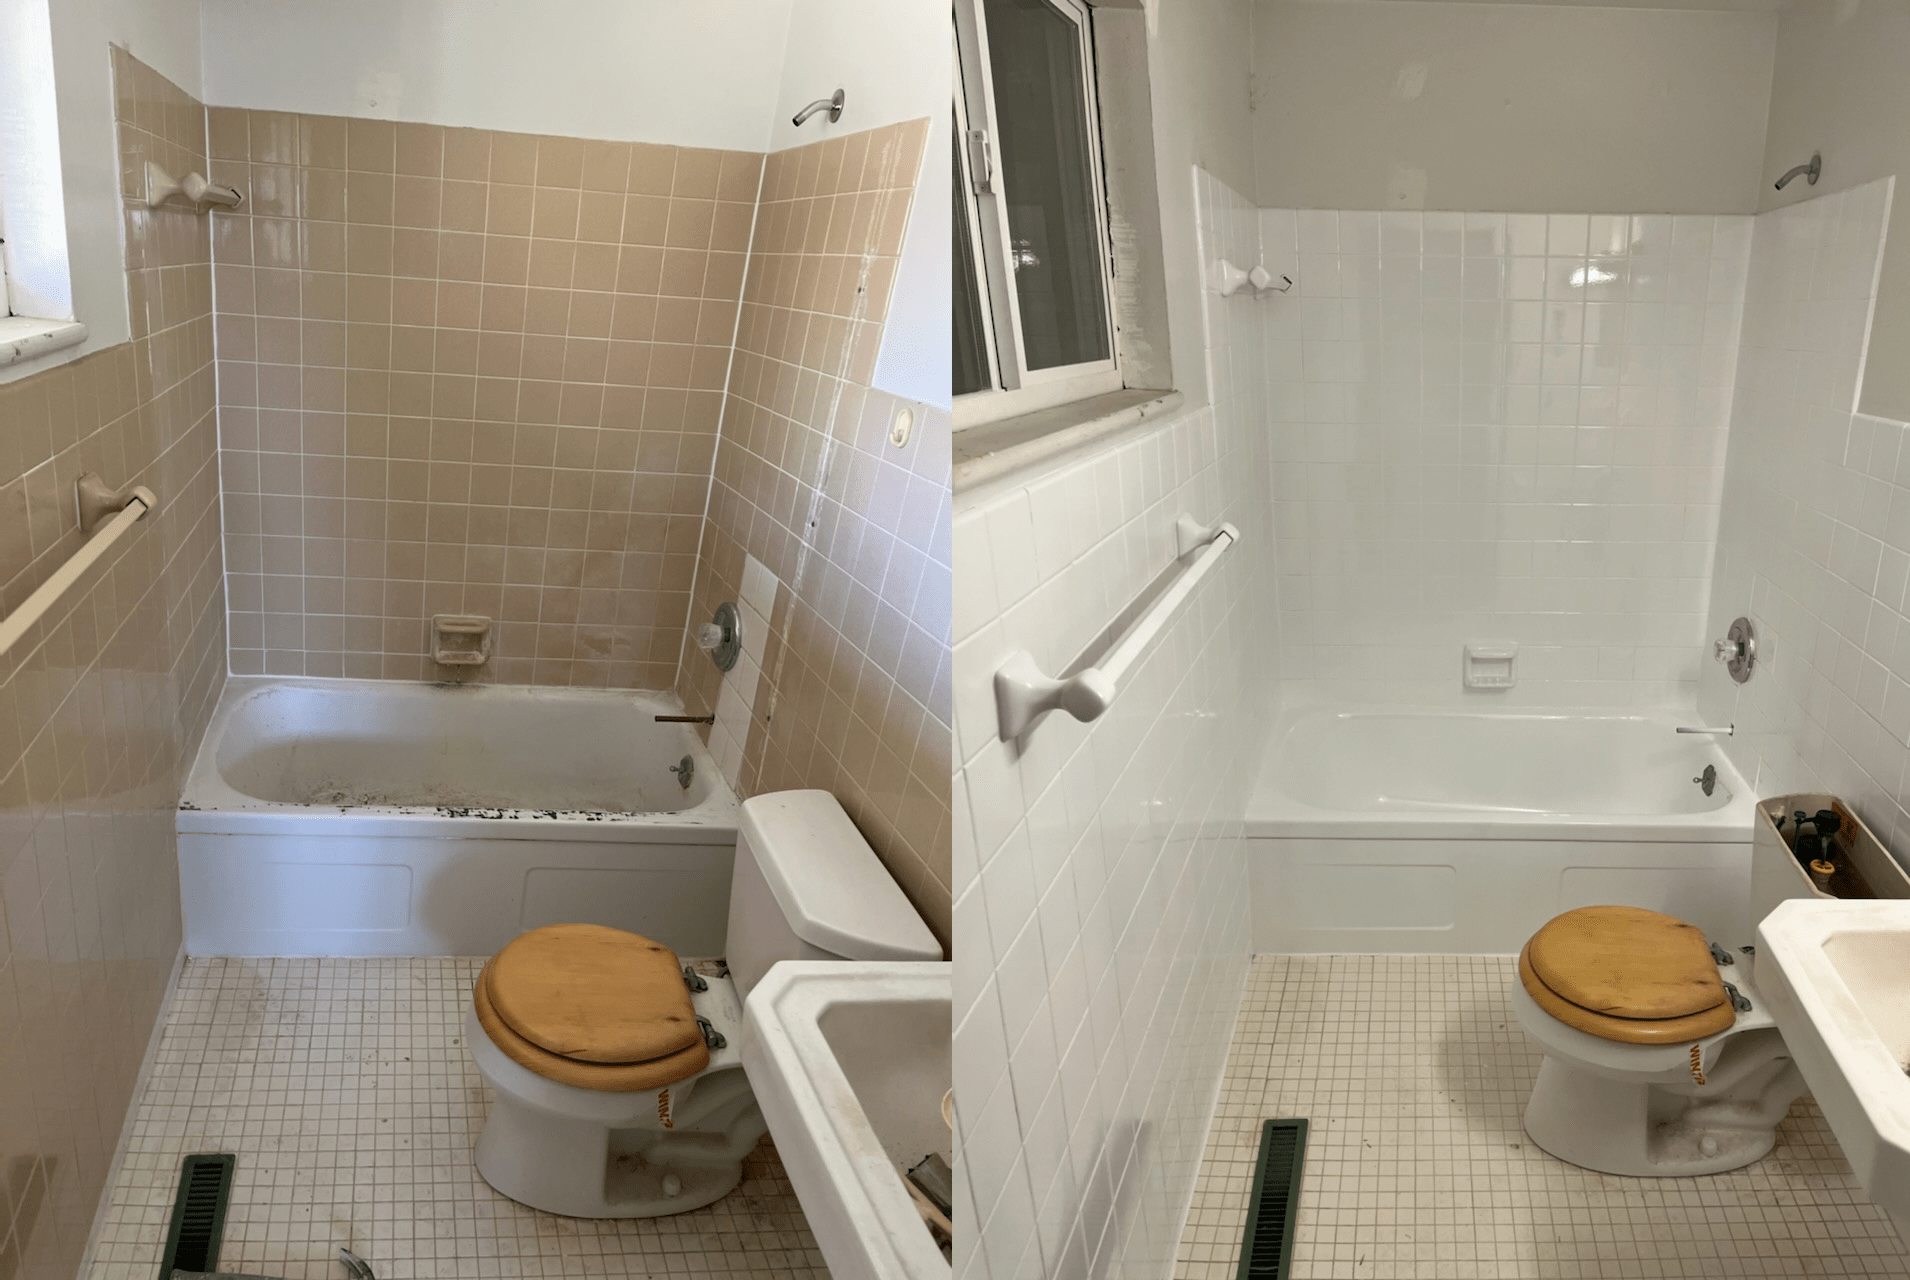 Tile Refinishing Before & After Near Norwood, OH